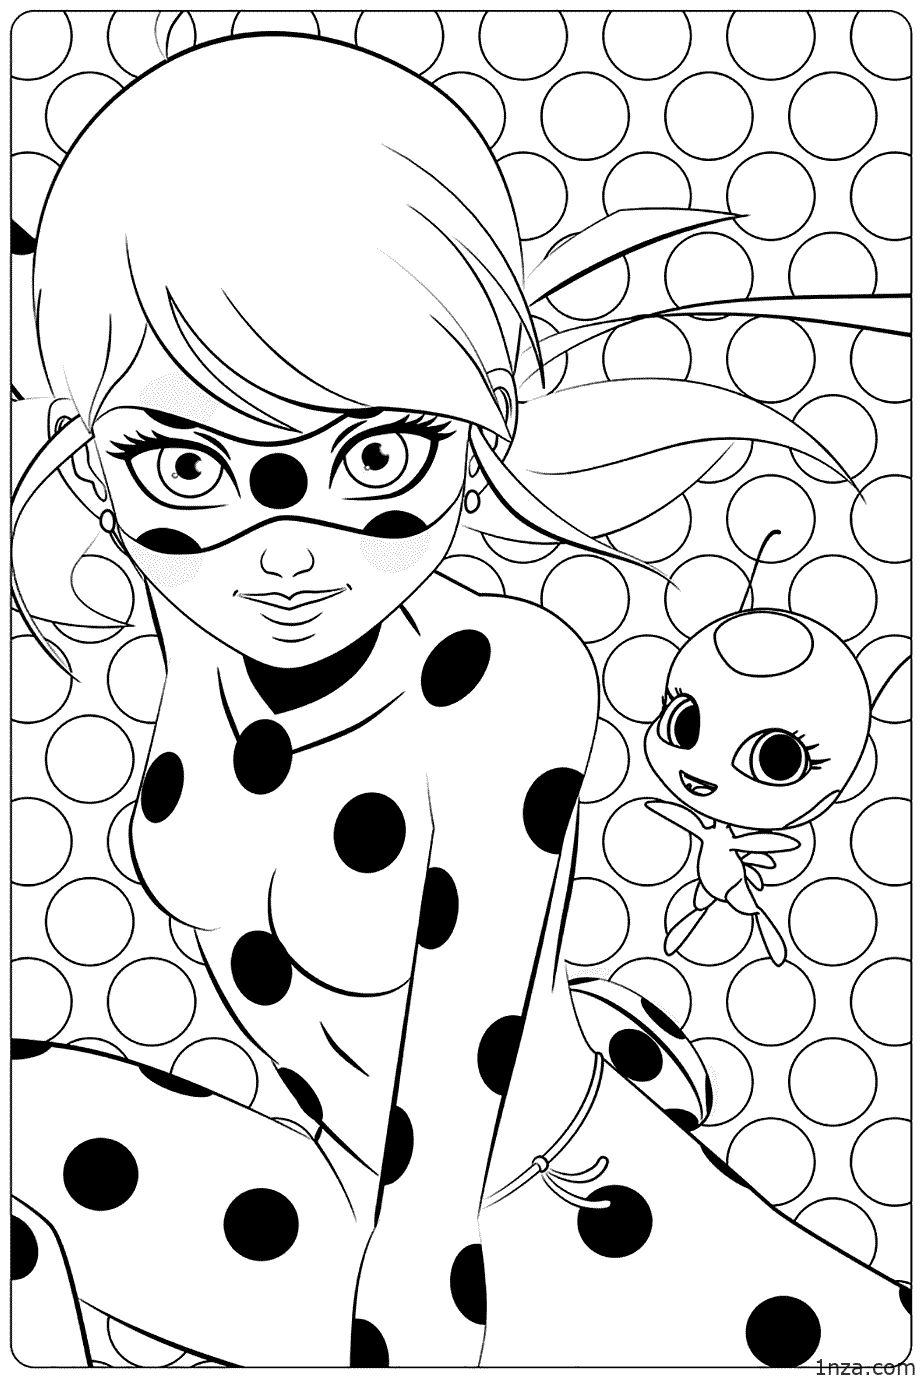 15 Free Printable Miraculous Ladybug Coloring Pages - 1NZA